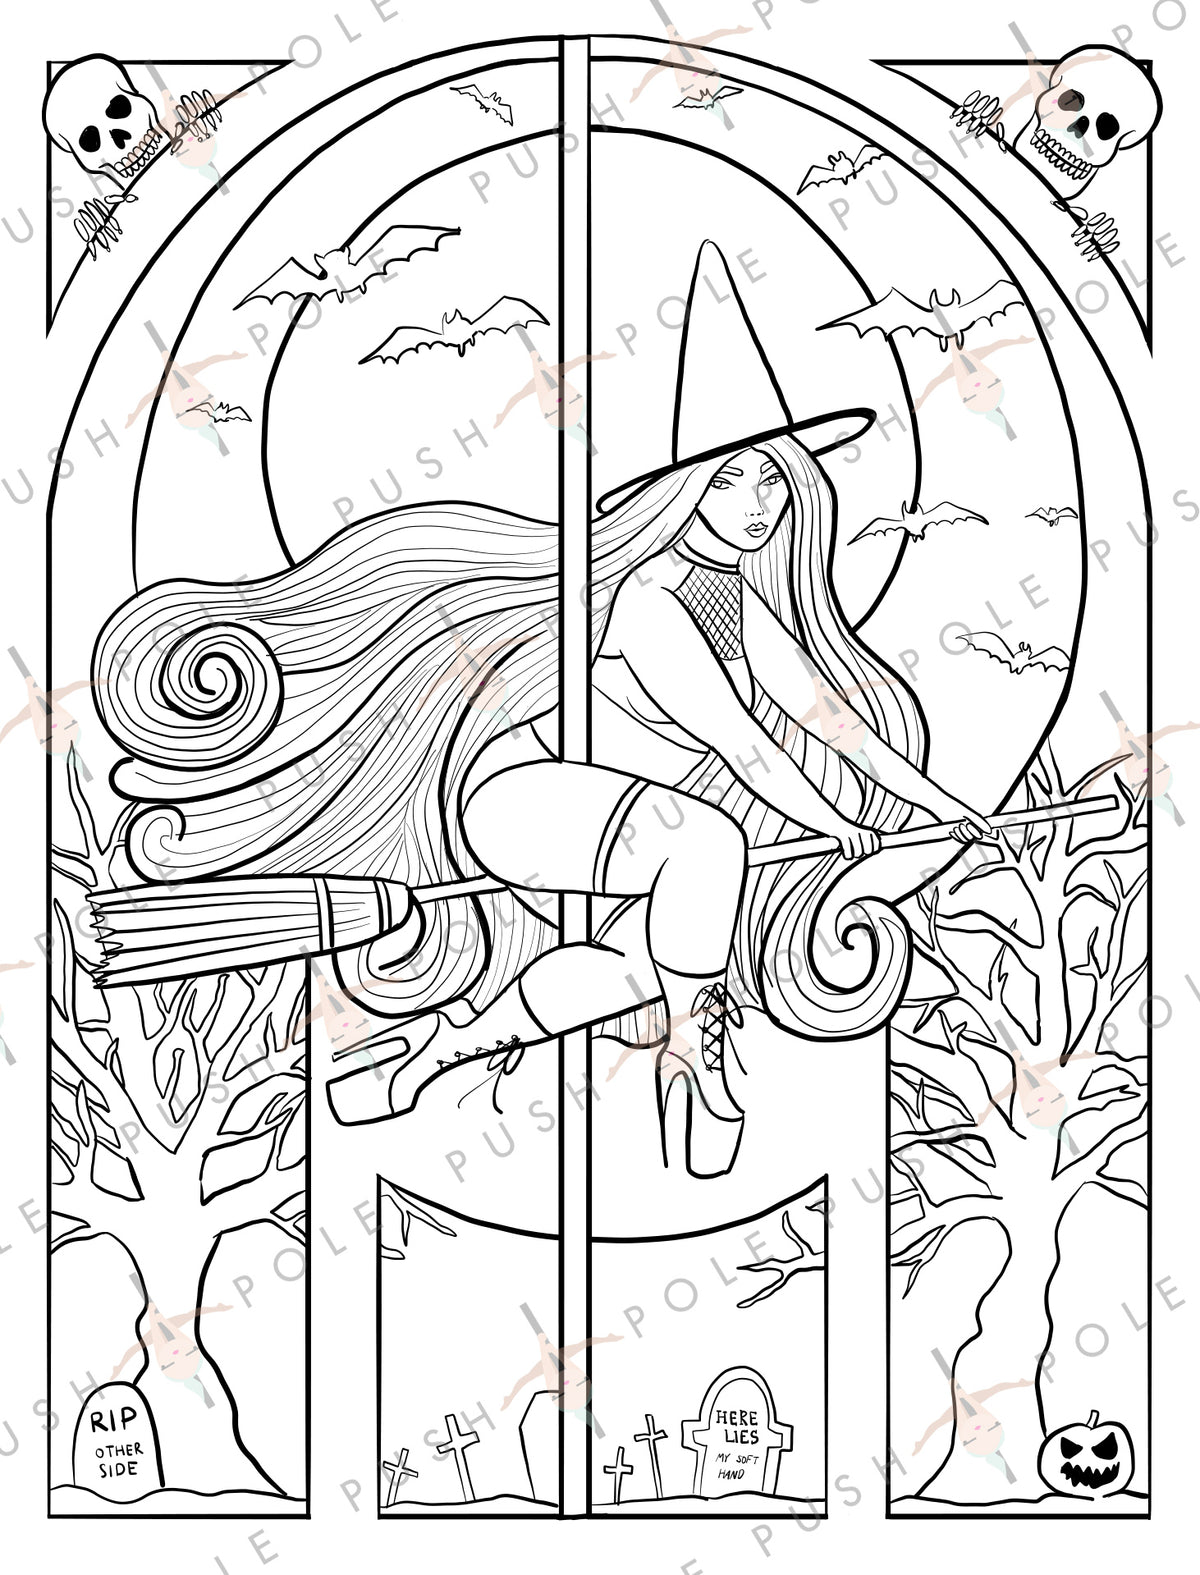 Witch halloween pole dancer digital coloring page x â push and pole